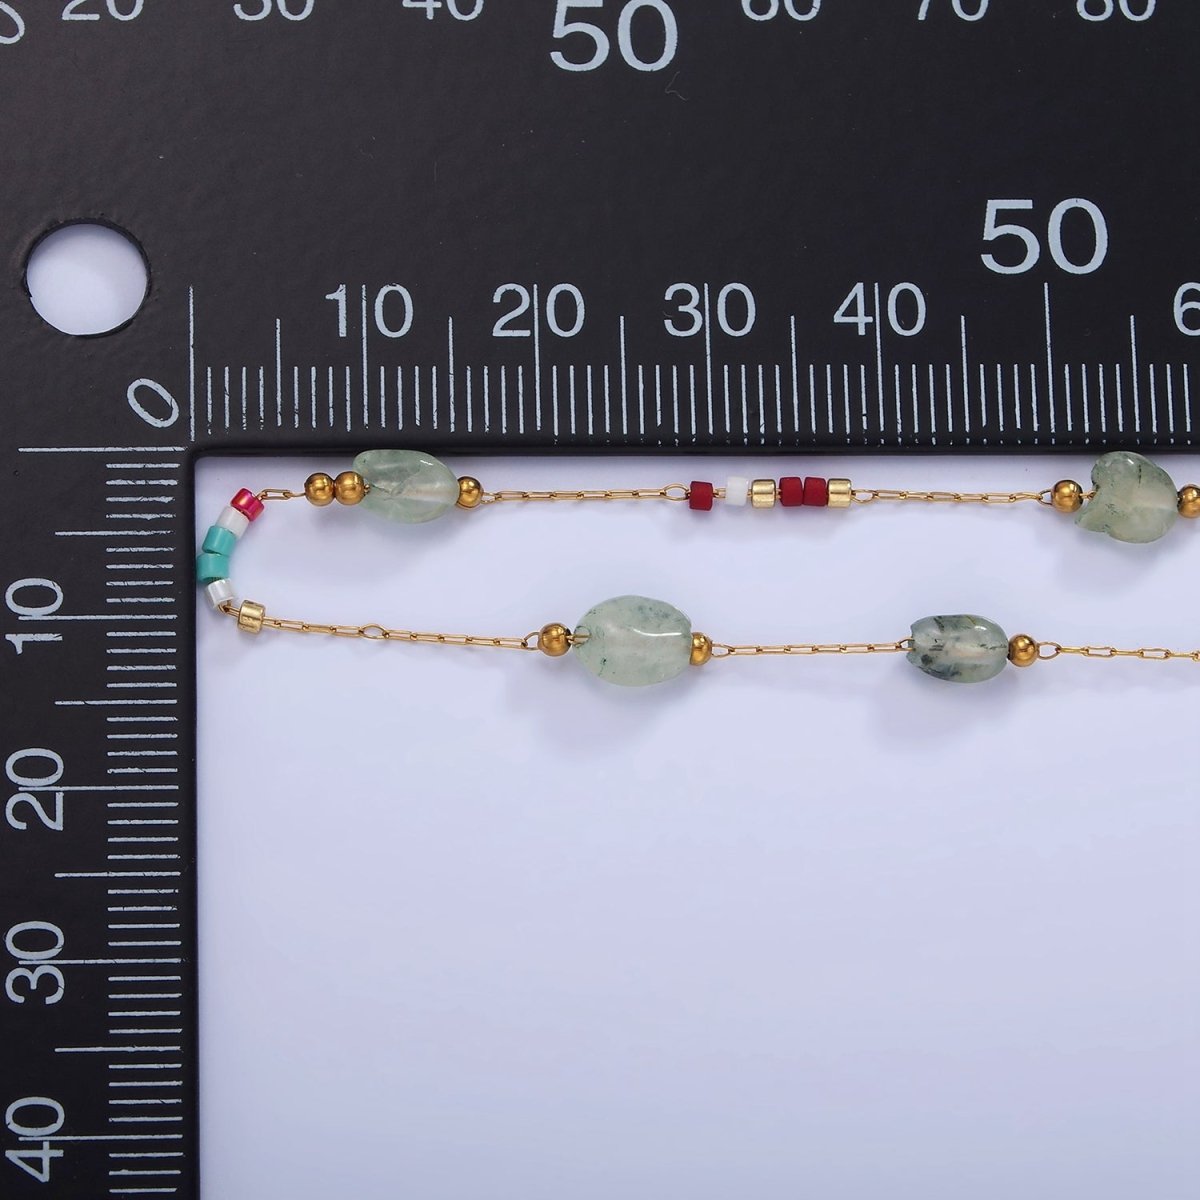 Green Gemstone Beaded Chain on Gold Paperclip Chain by Yard | ROLL-1499 - DLUXCA